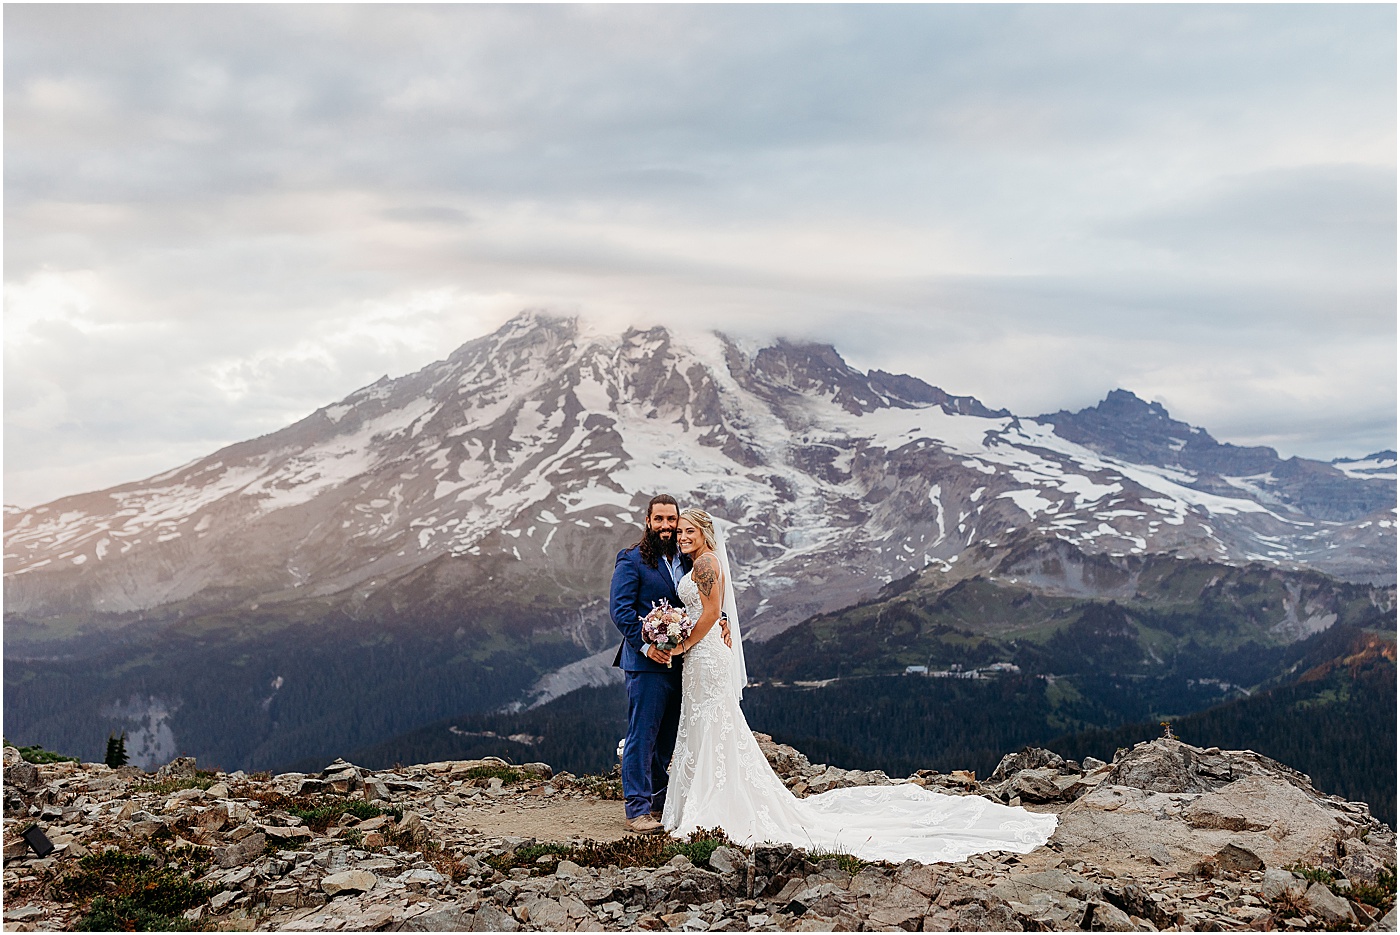 Bride and groom portraits with a view of Mount Rainier | Photo by Megan Montalvo Photography